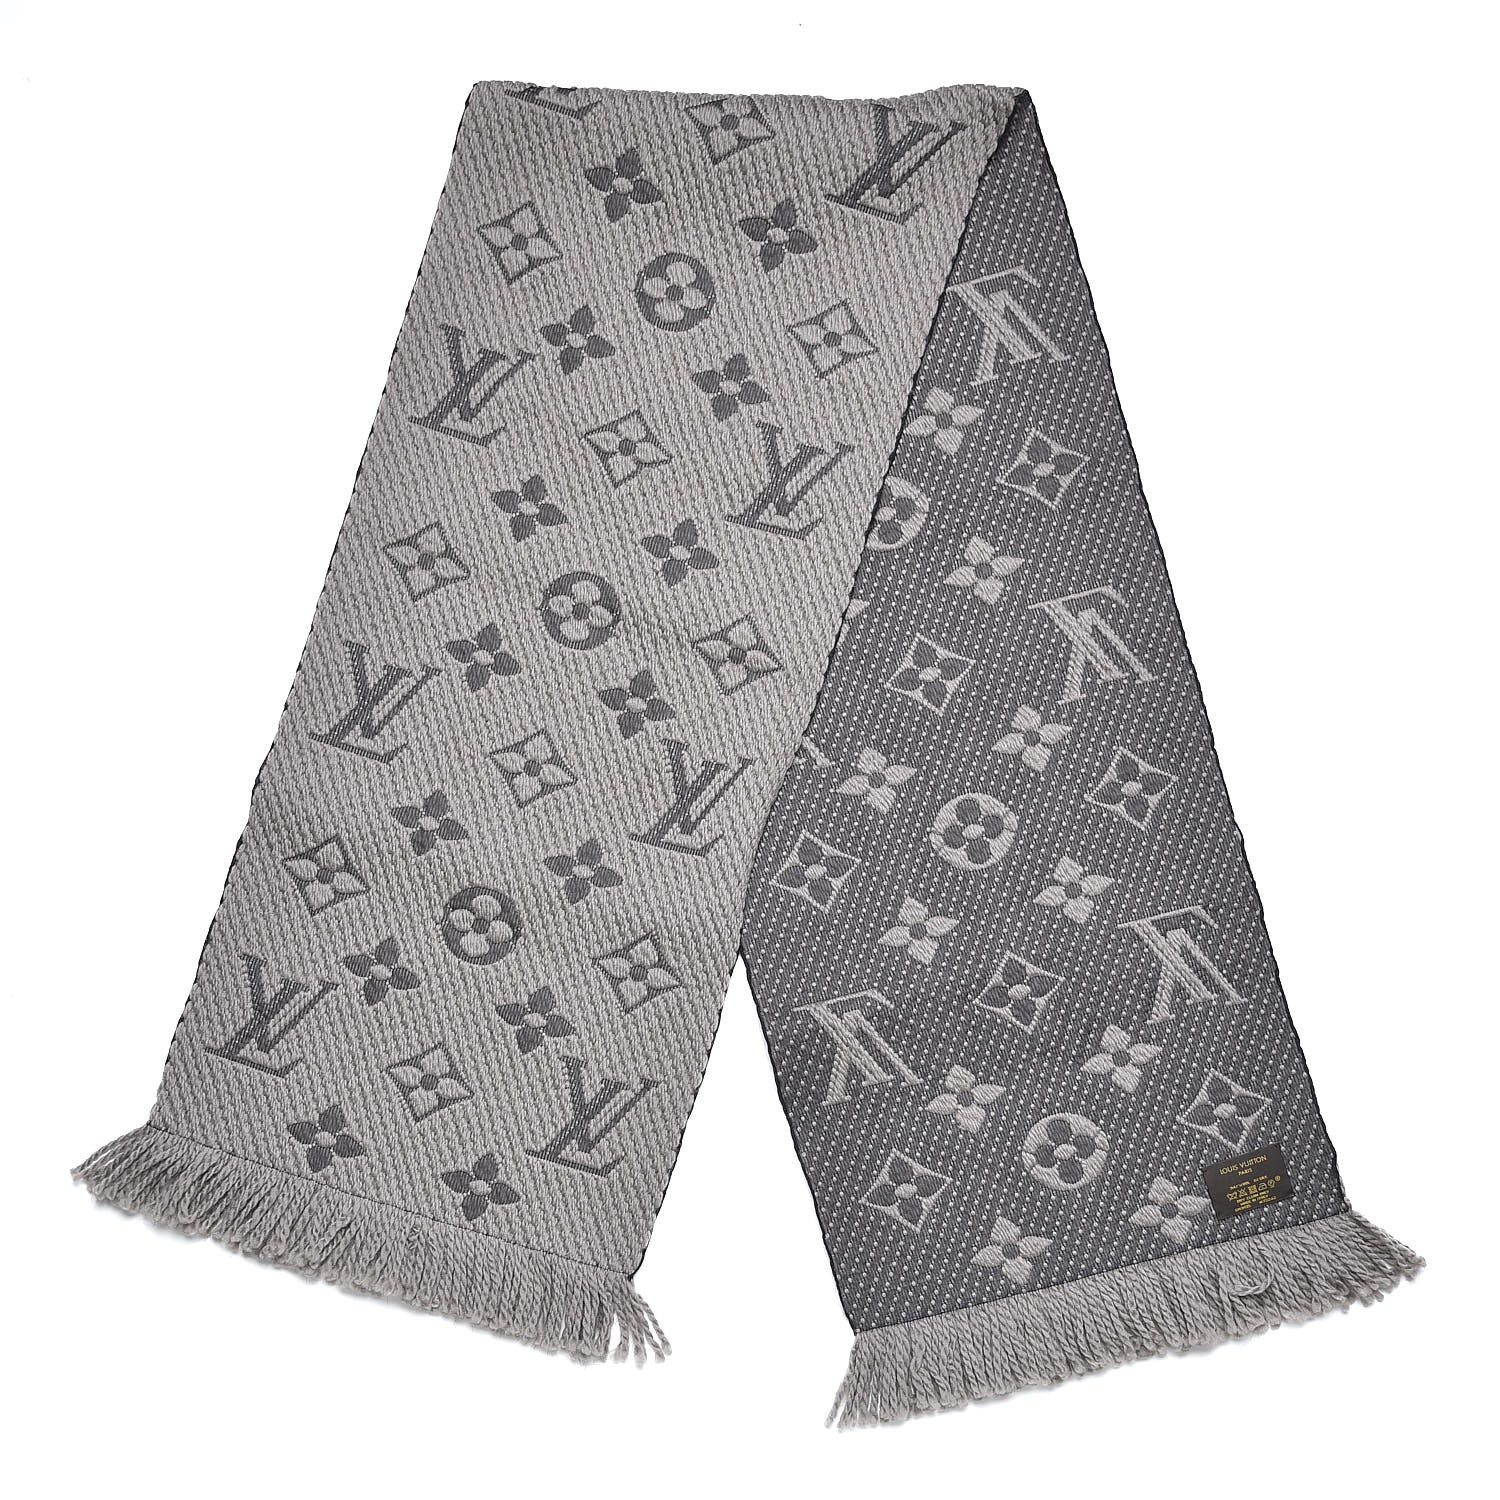 LOUIS VUITTON. TWO SILK SCARVES AND A WOOL SCARF. IN THE…